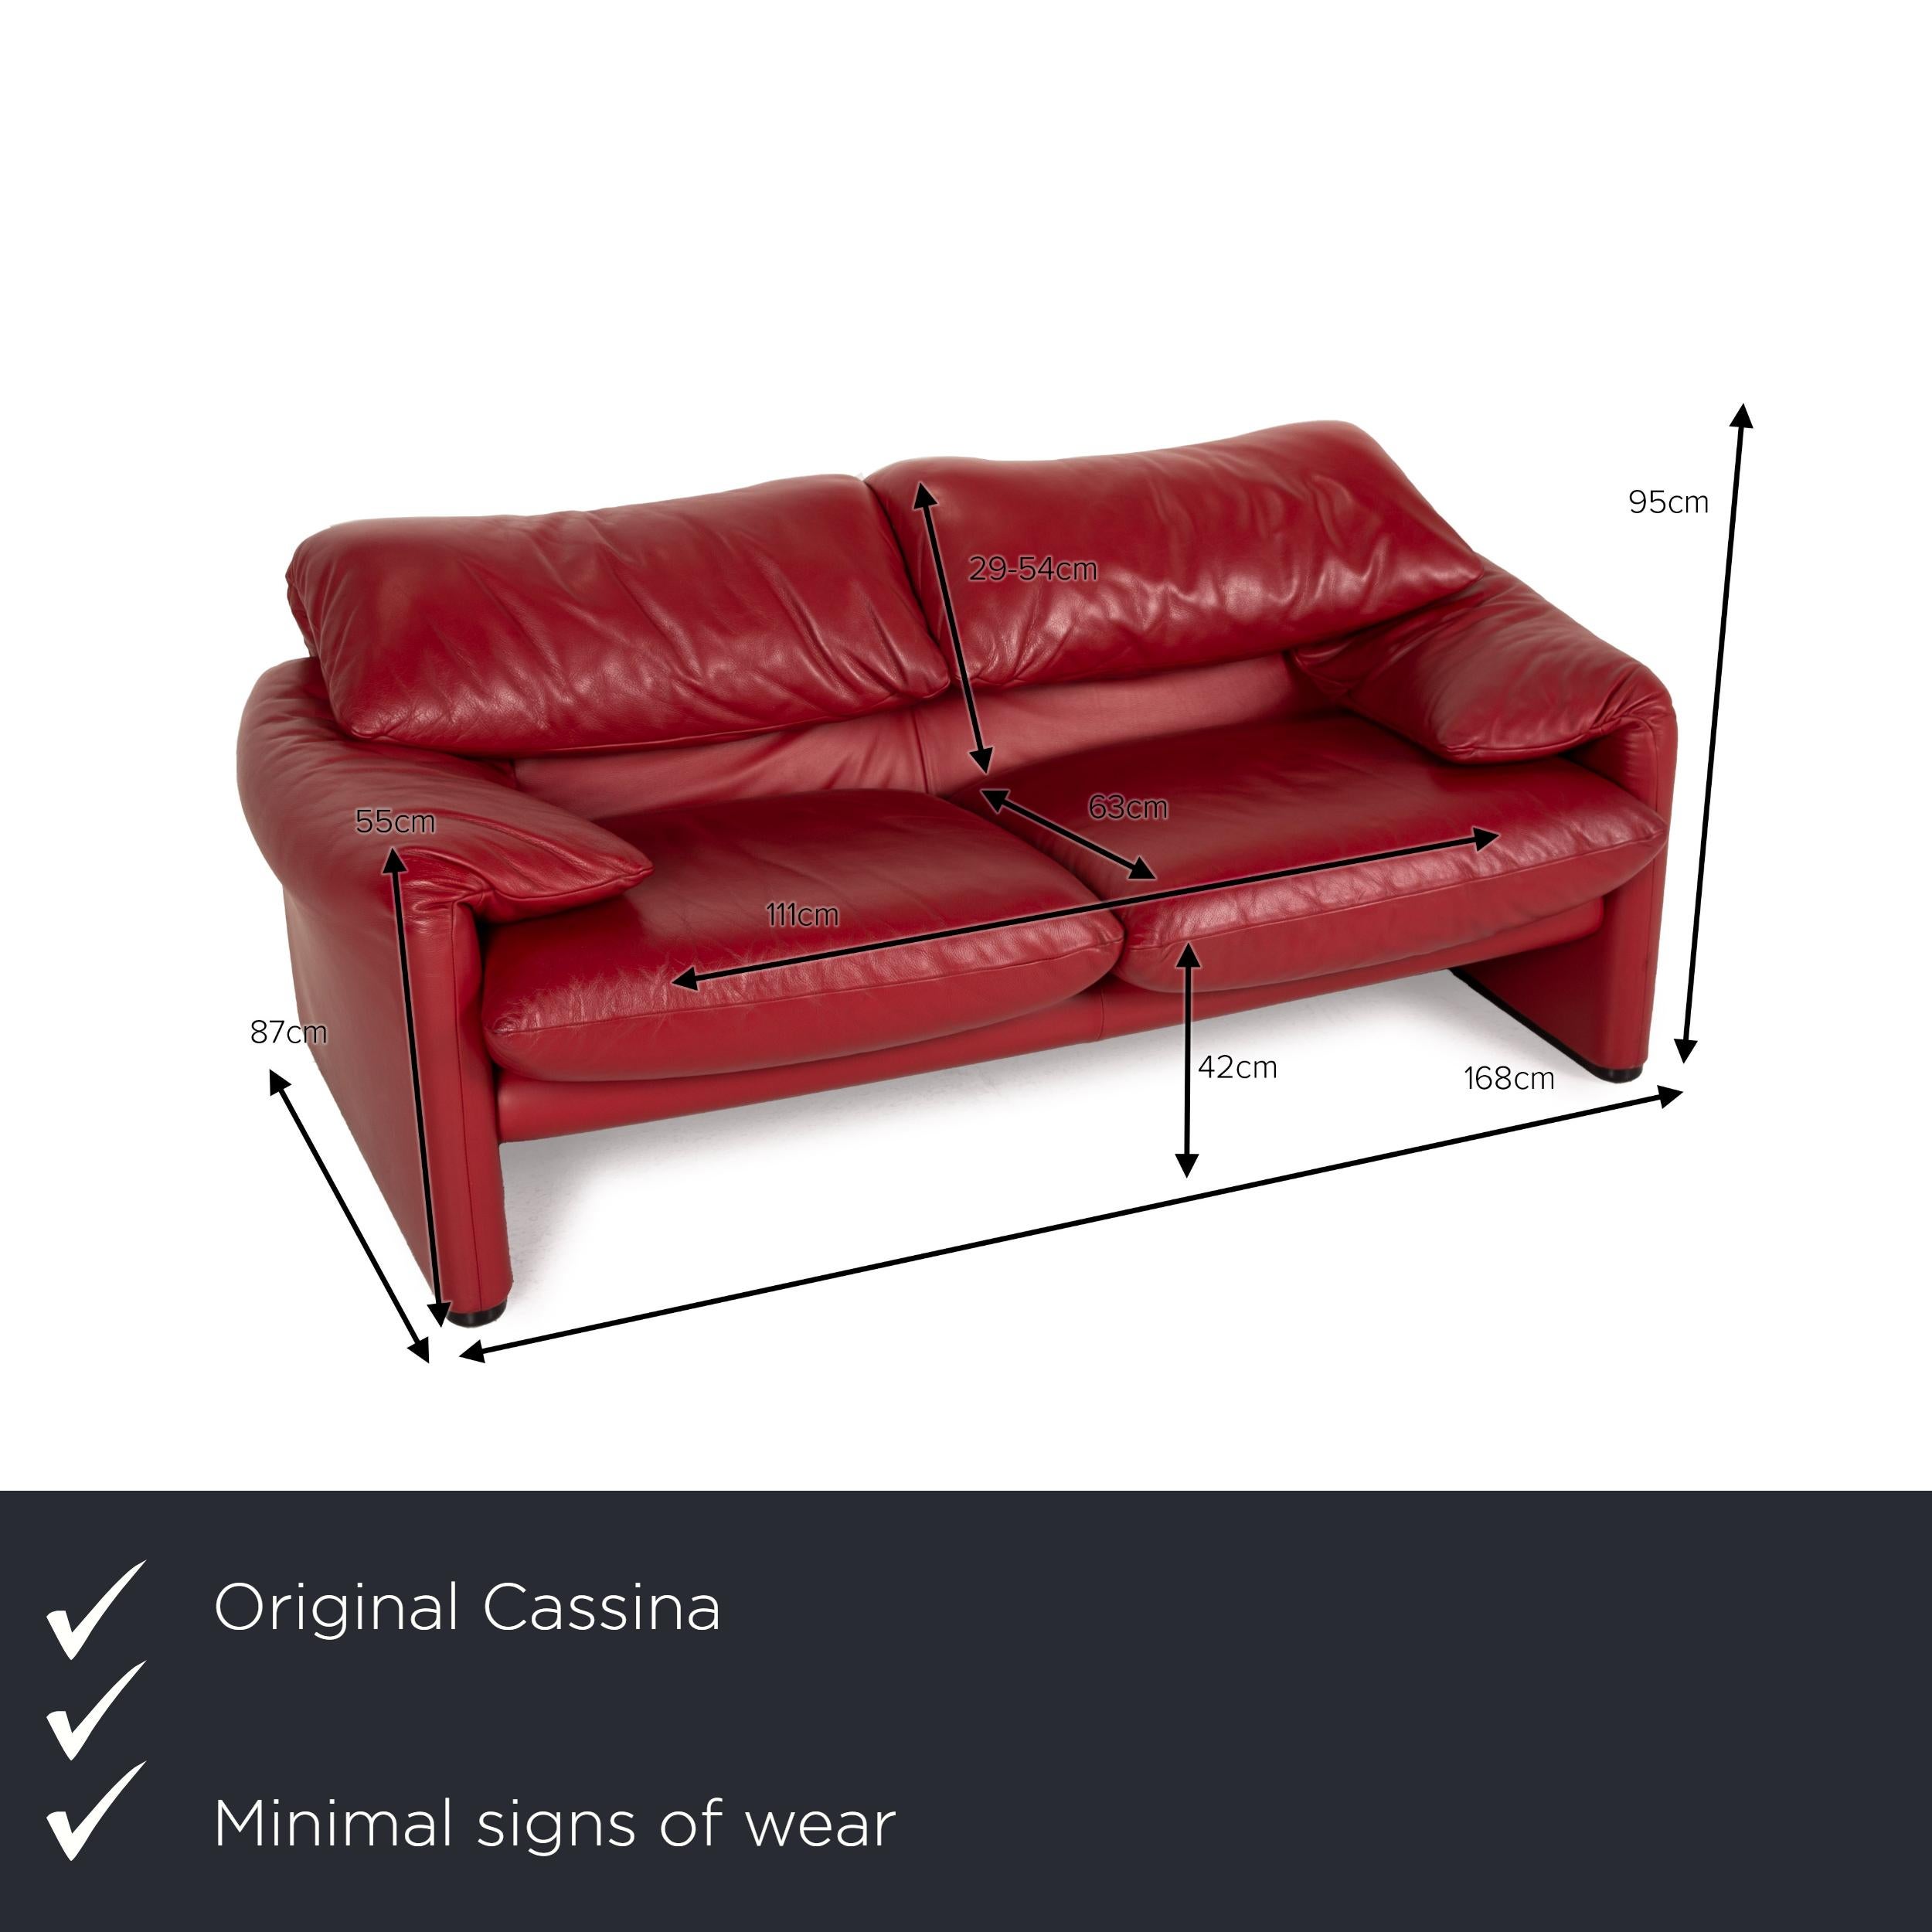 We present to you a Cassina Maralunga designer leather sofa red two-seater couch function.
 

 Product measurements in centimeters:
 

Depth: 87
Width: 168
Height: 95
Seat height: 42
Rest height: 55
Seat depth: 63
Seat width: 111
Back